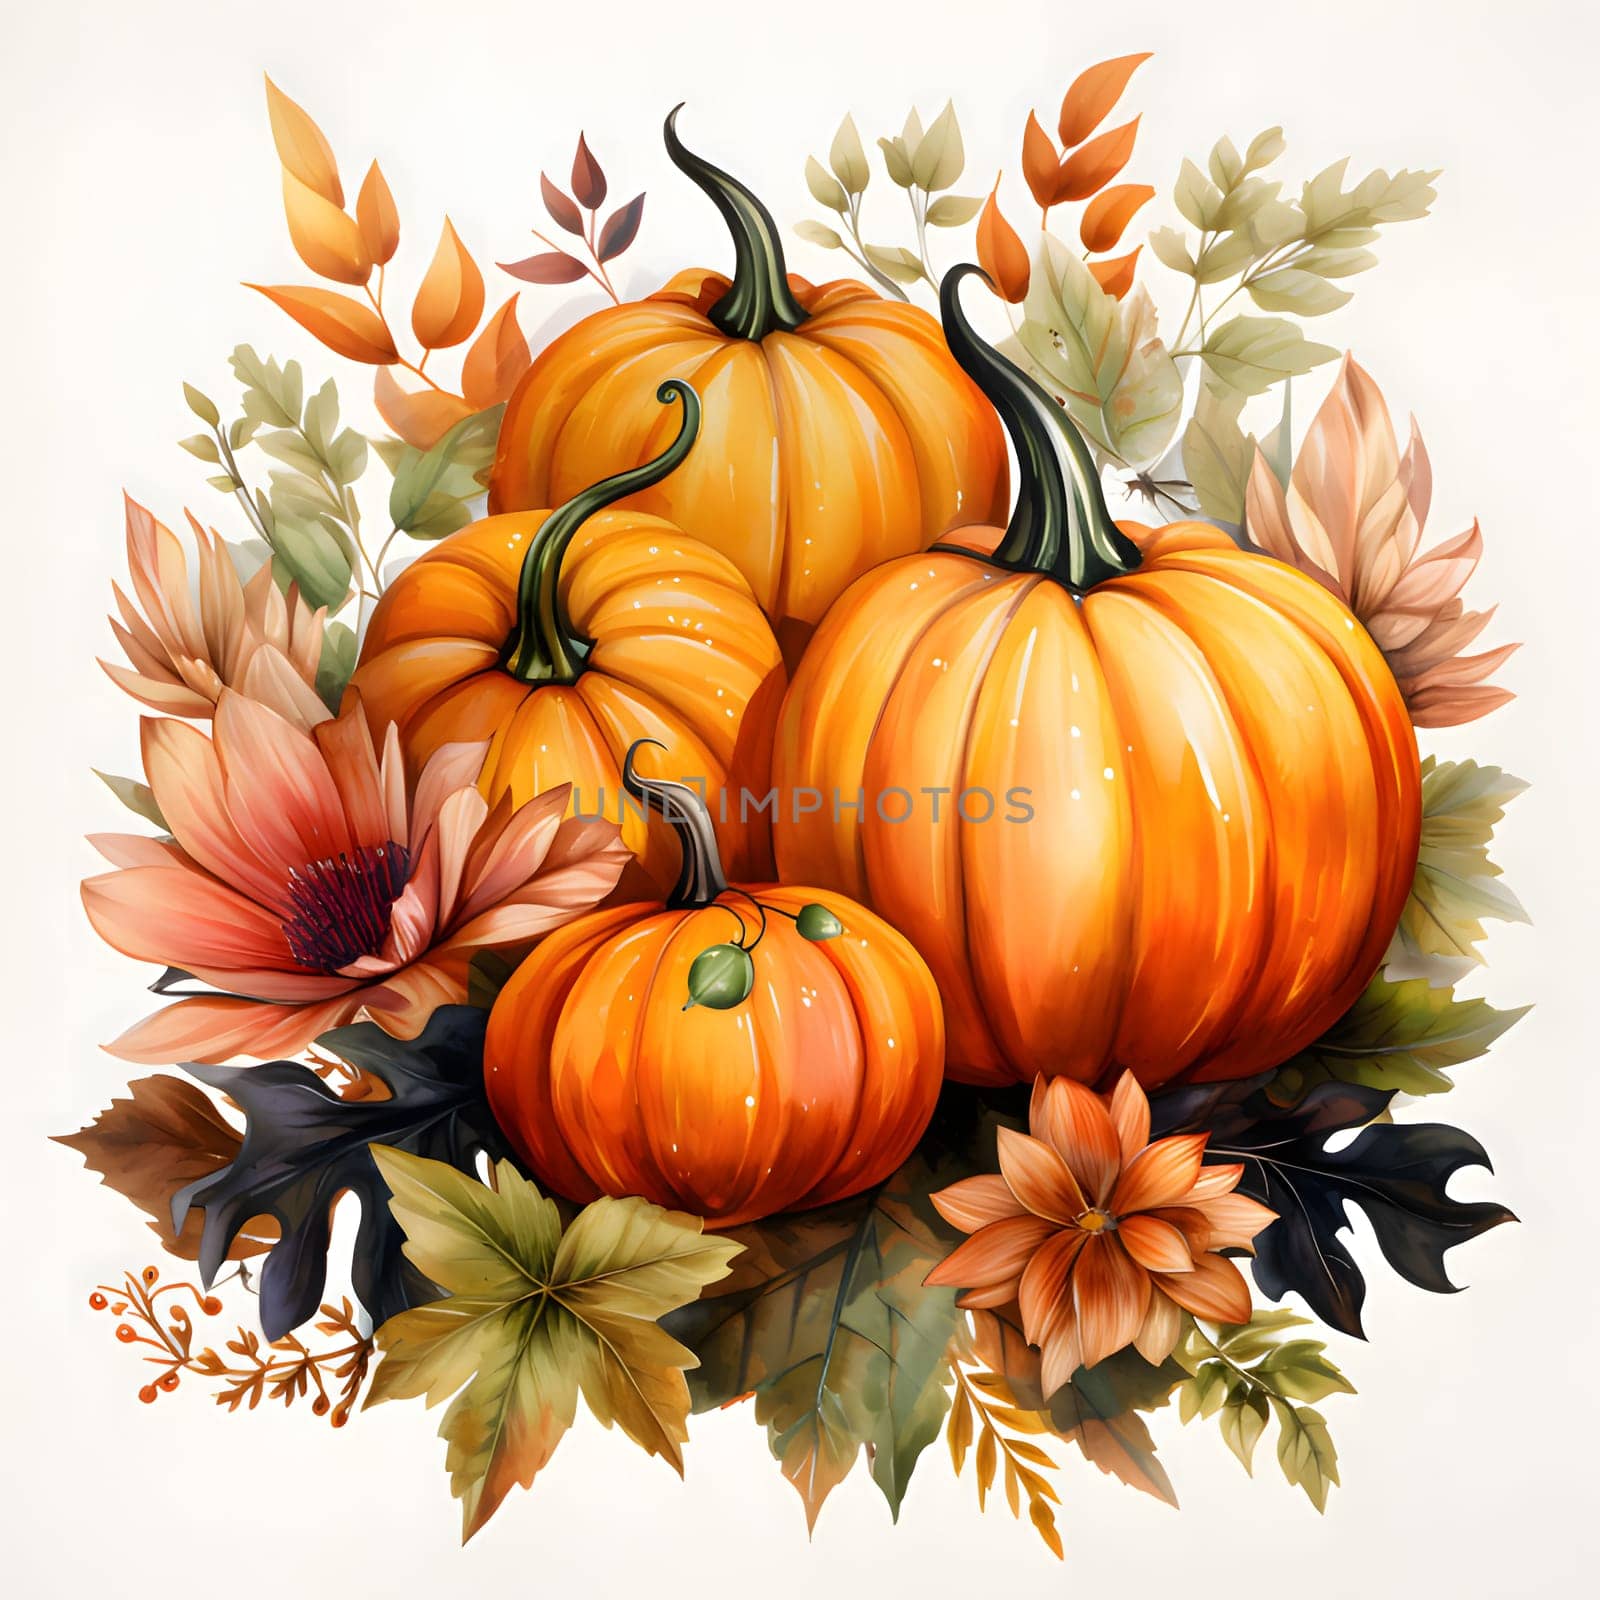 Illustration of pumpkins around autumn leaves. Pumpkin as a dish of thanksgiving for the harvest, picture on a white isolated background. by ThemesS